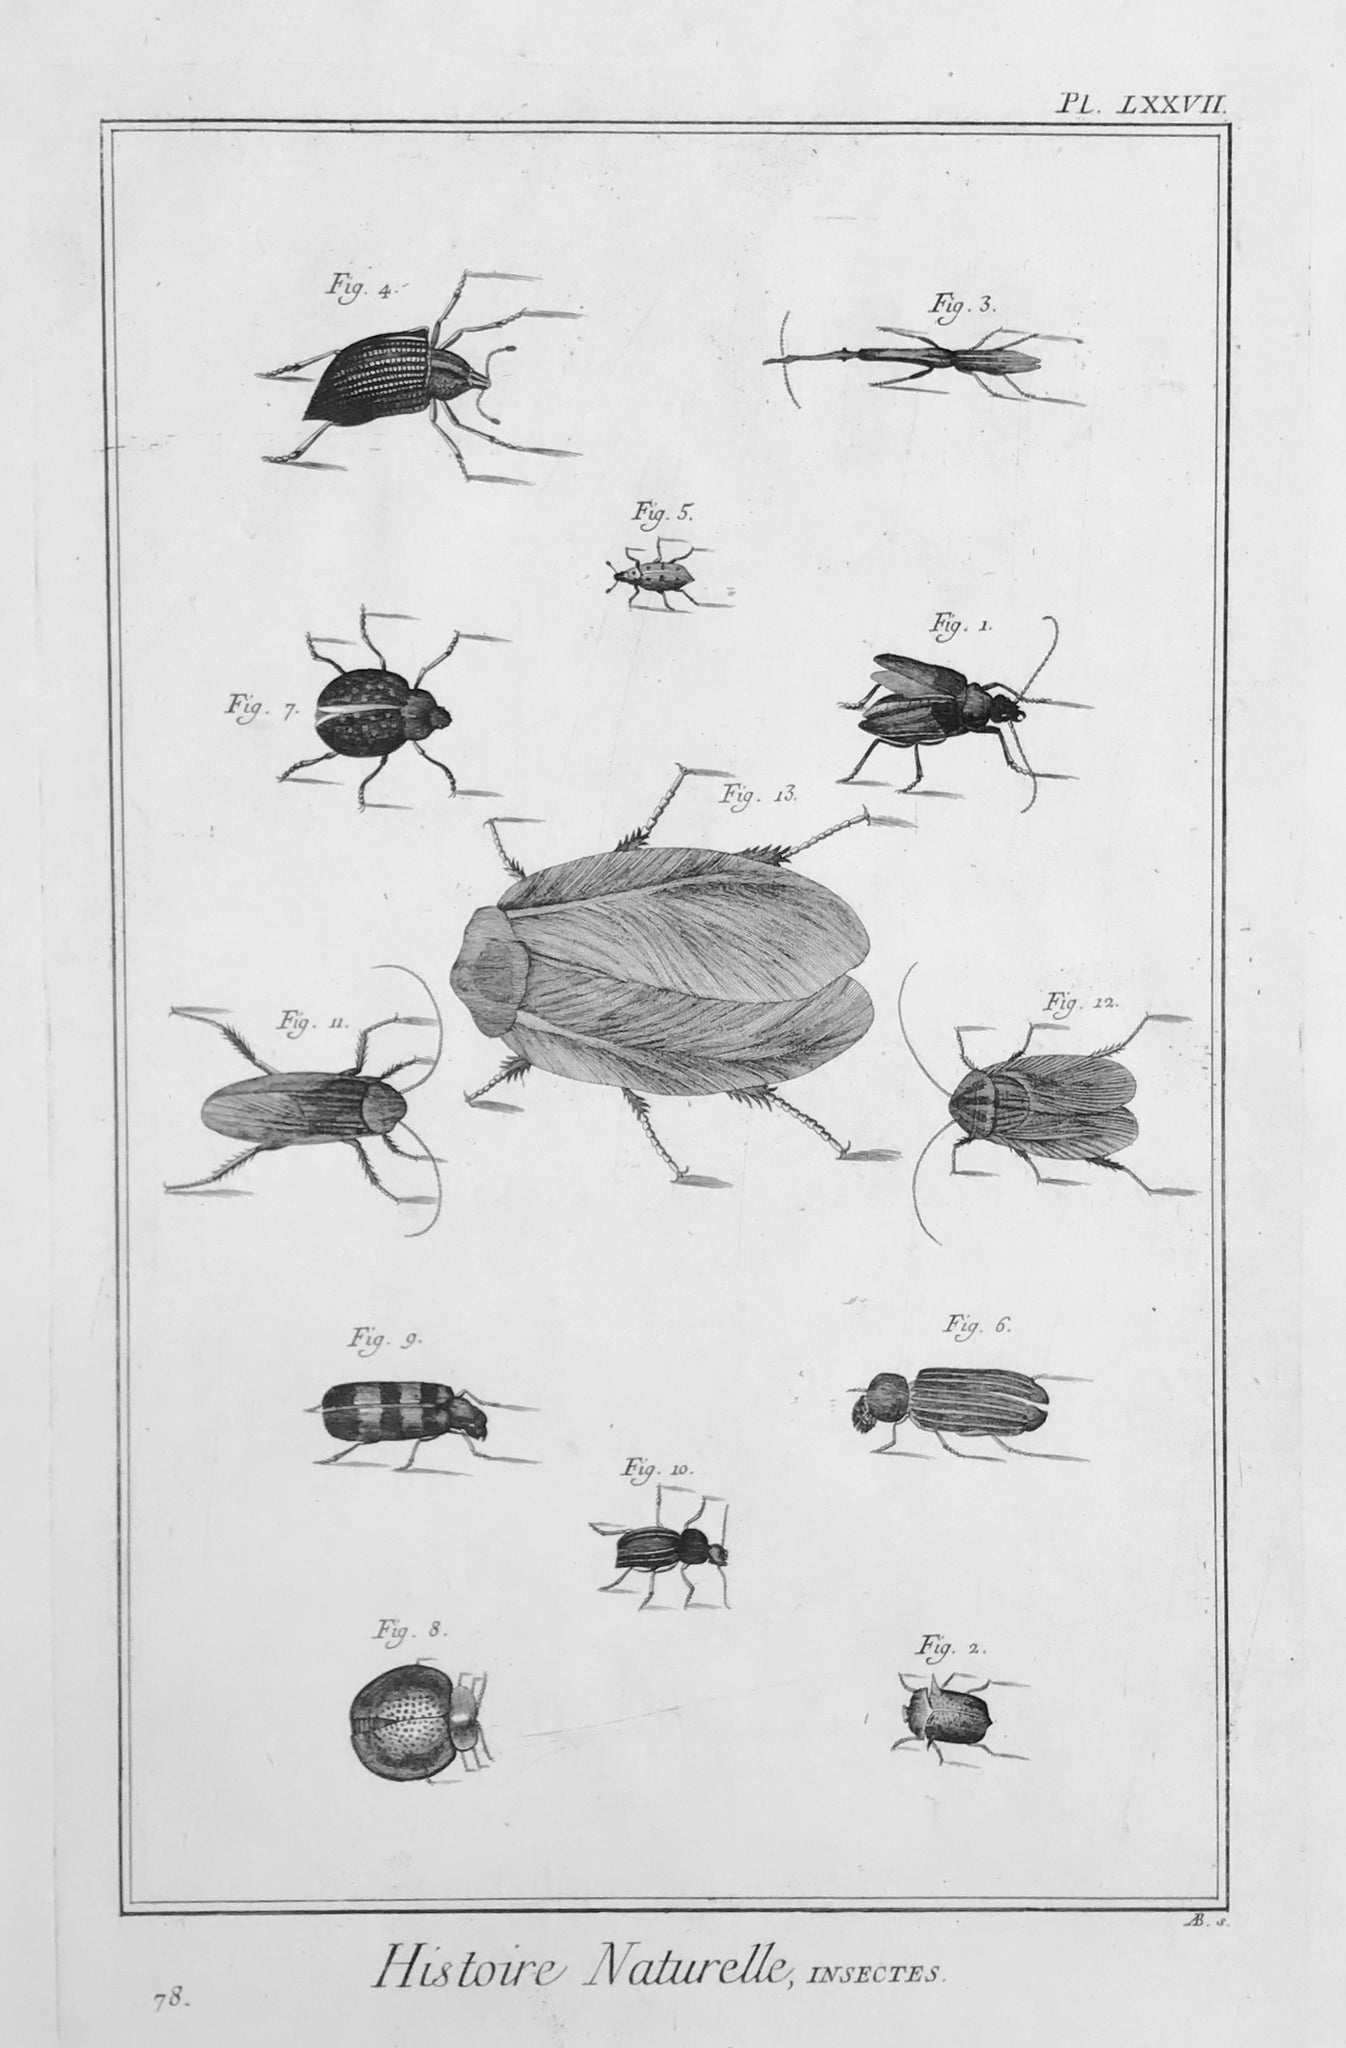 No Title.  Copperplate etching from "Histoire Naturelle", published 1751 in Paris.